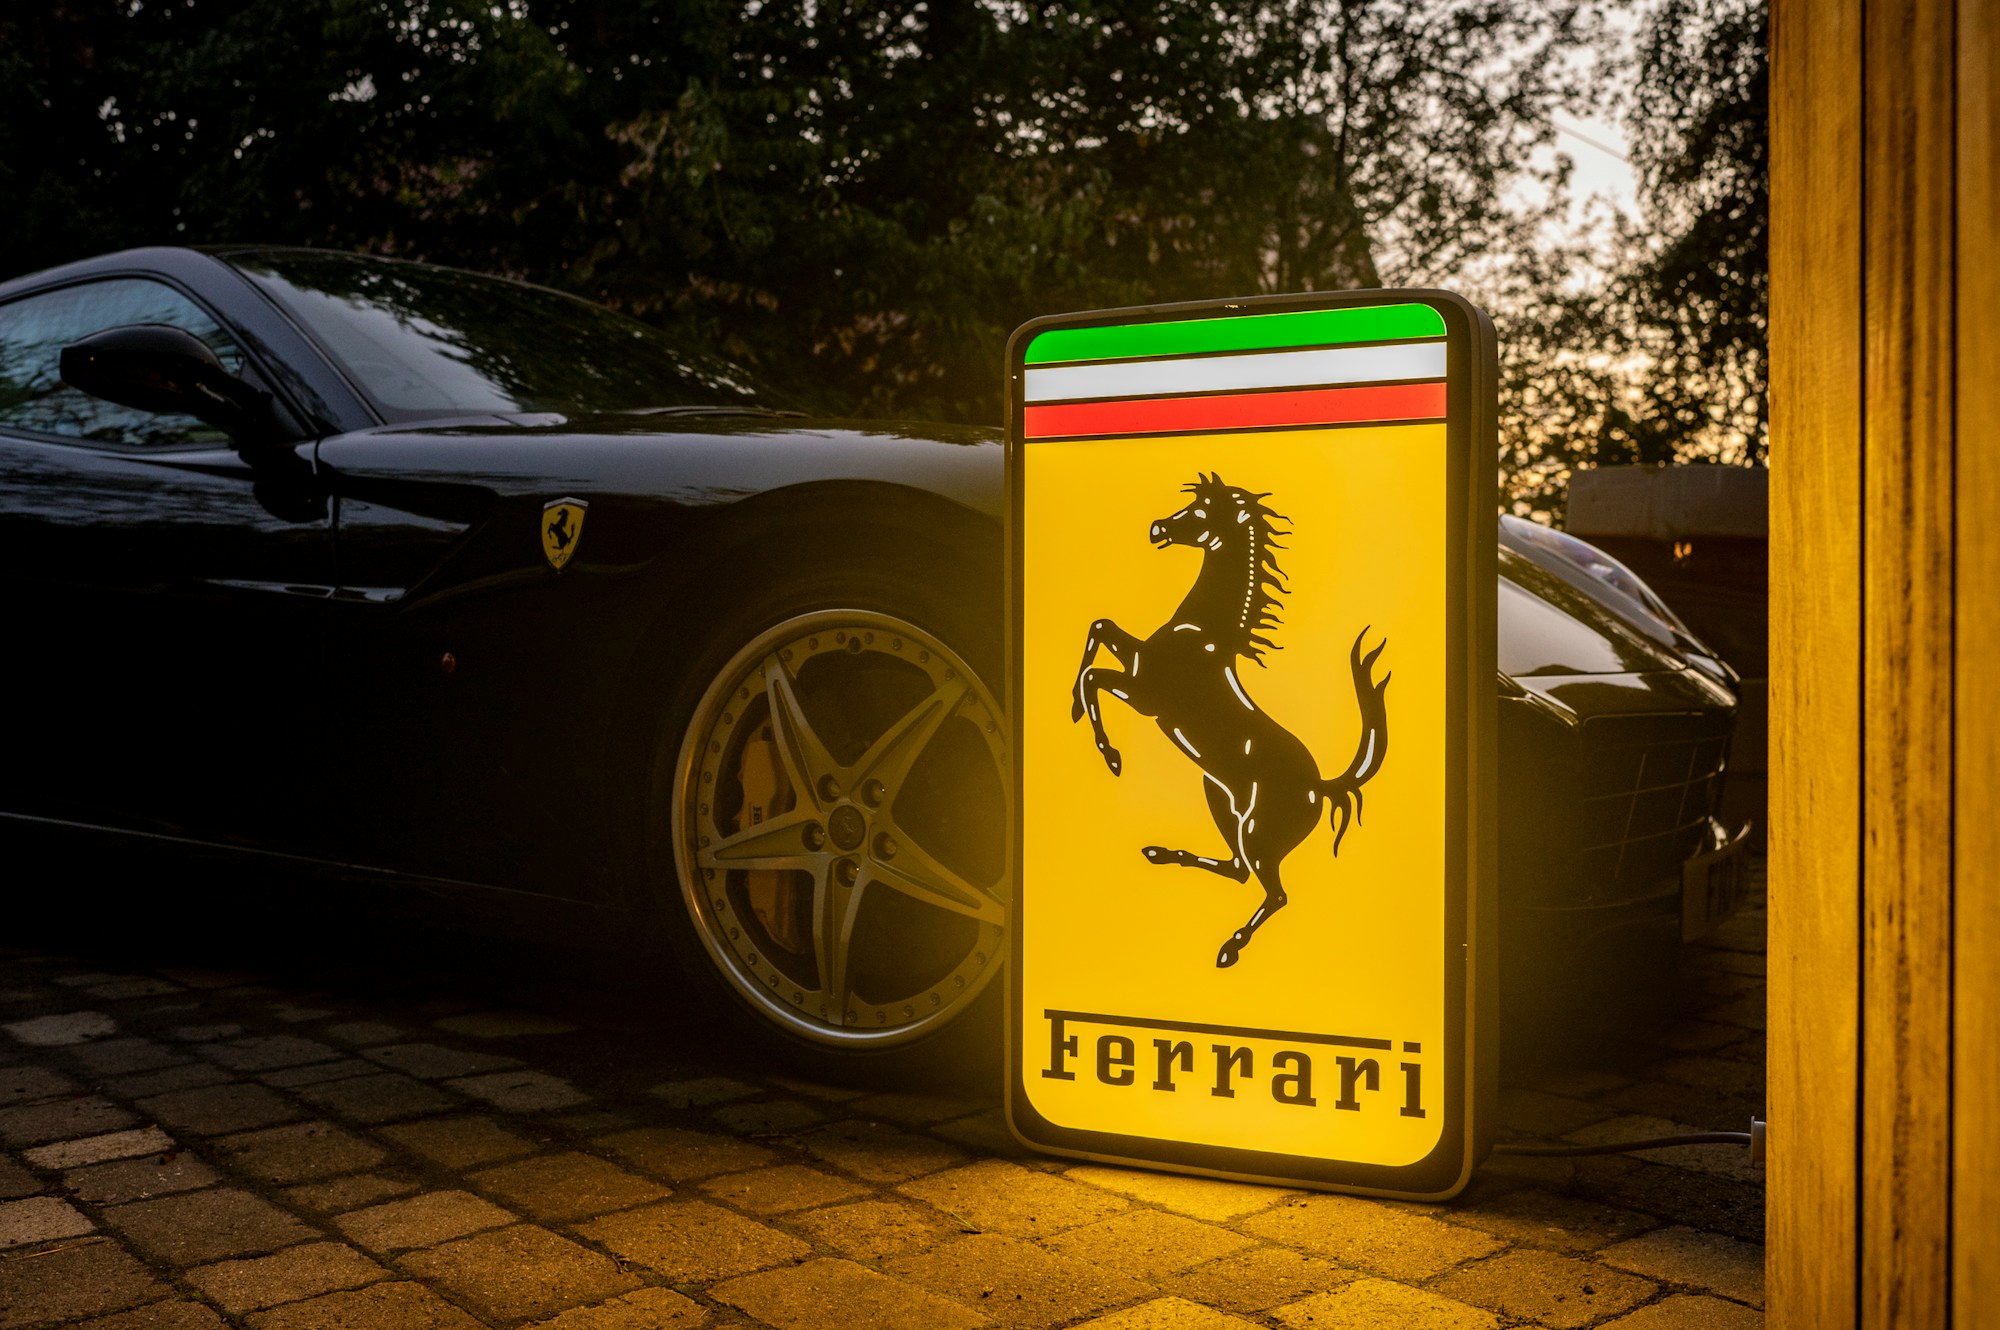 FERRARI ILLUMINATED SIGN for sale by auction in Corsham, Wiltshire